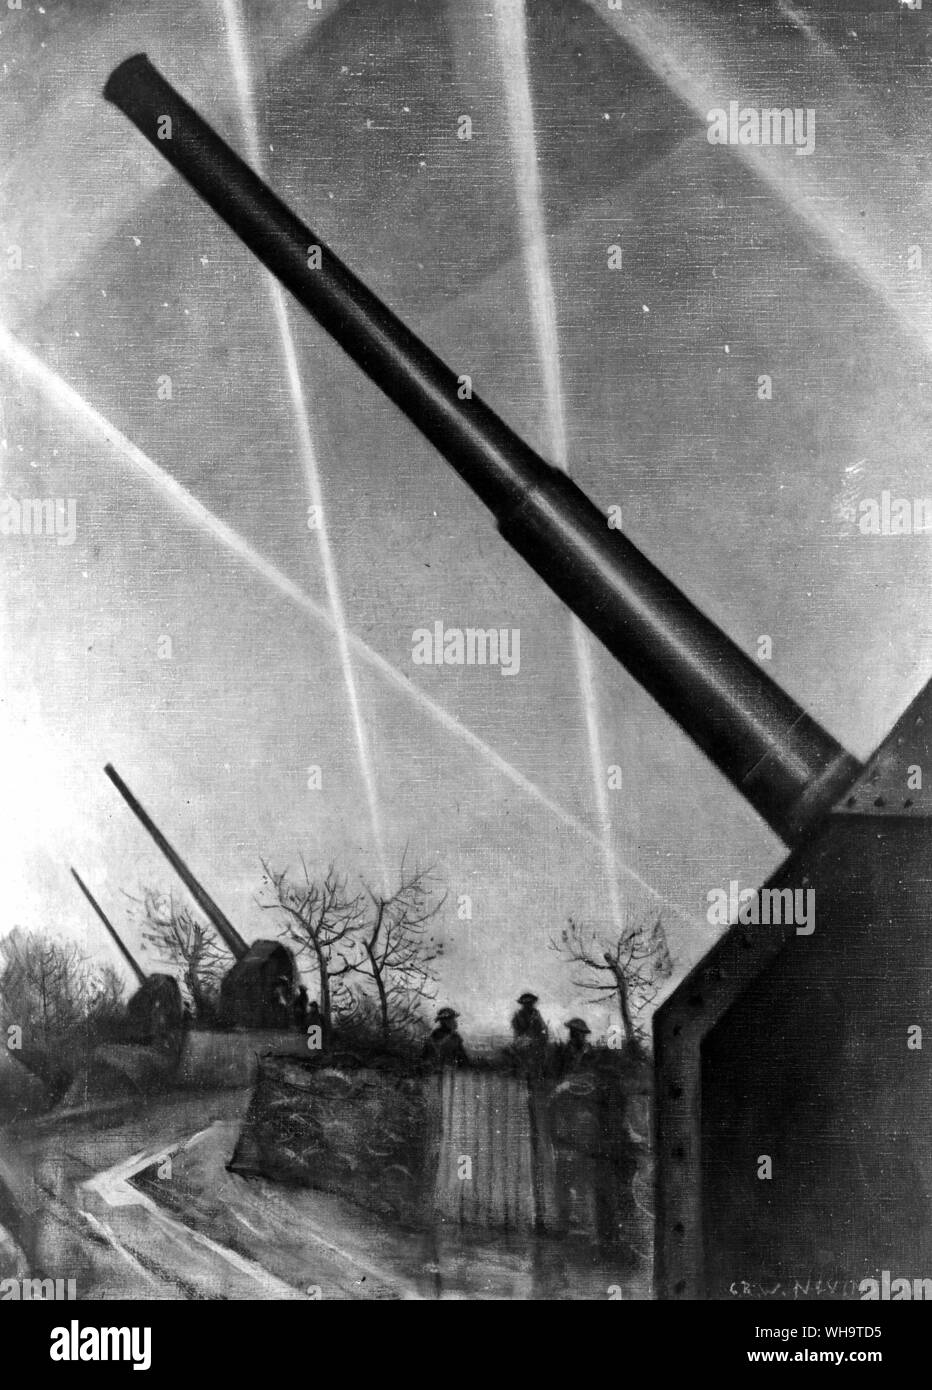 Anti-aircraft defences in oil paint. Stock Photo